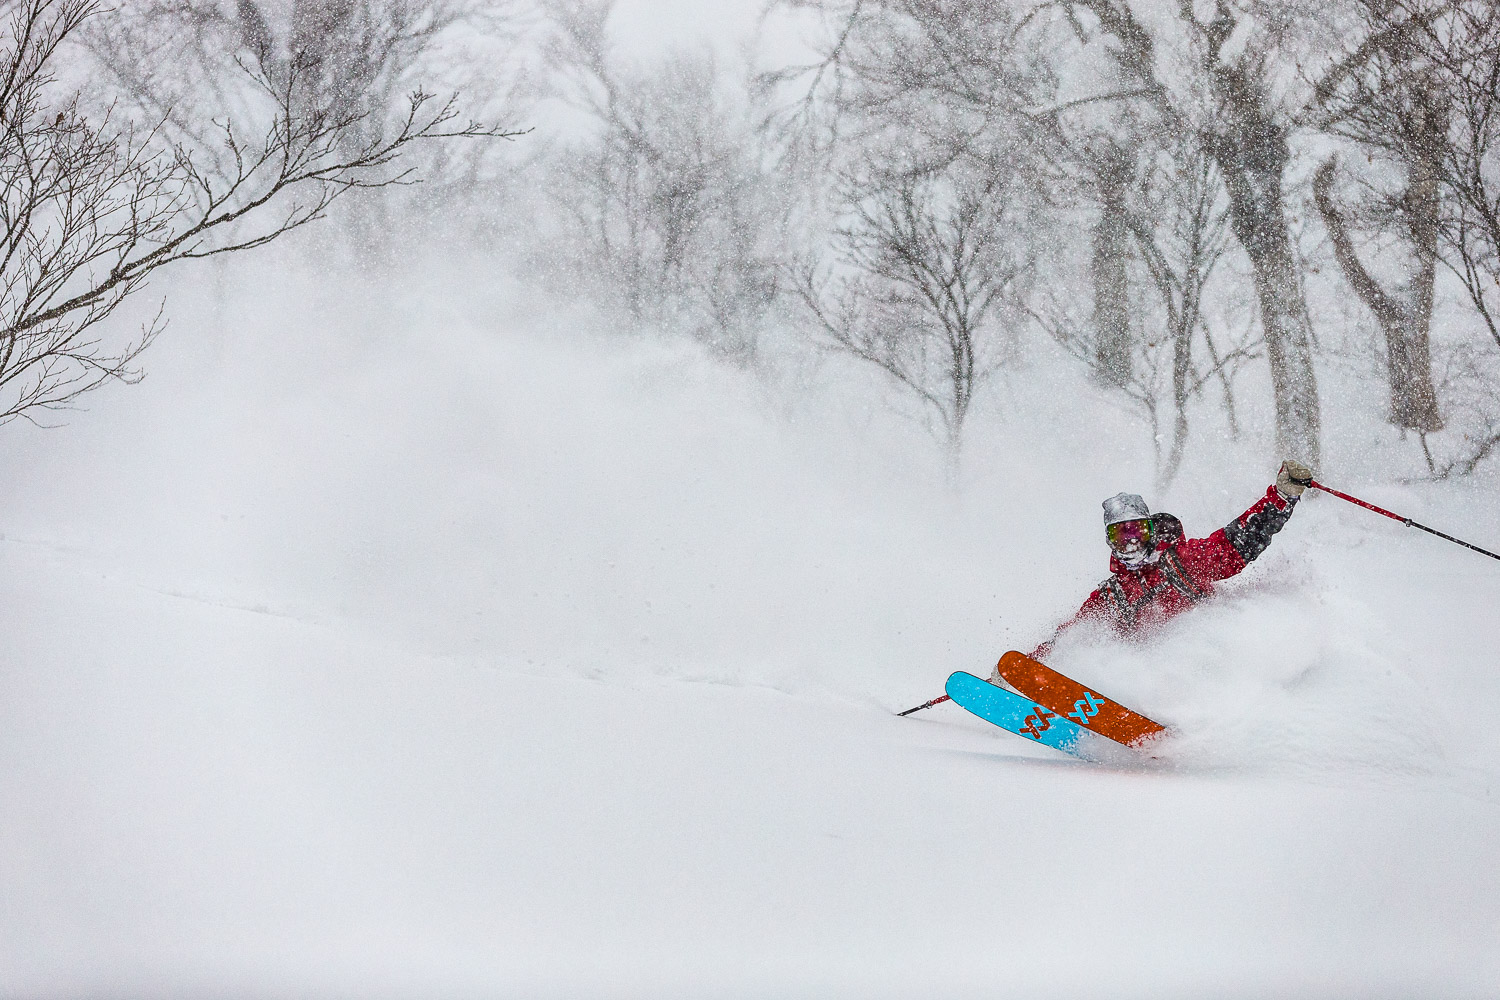 Tanner Rainville taking advantage of the snow with Shimamaki Snowcats.